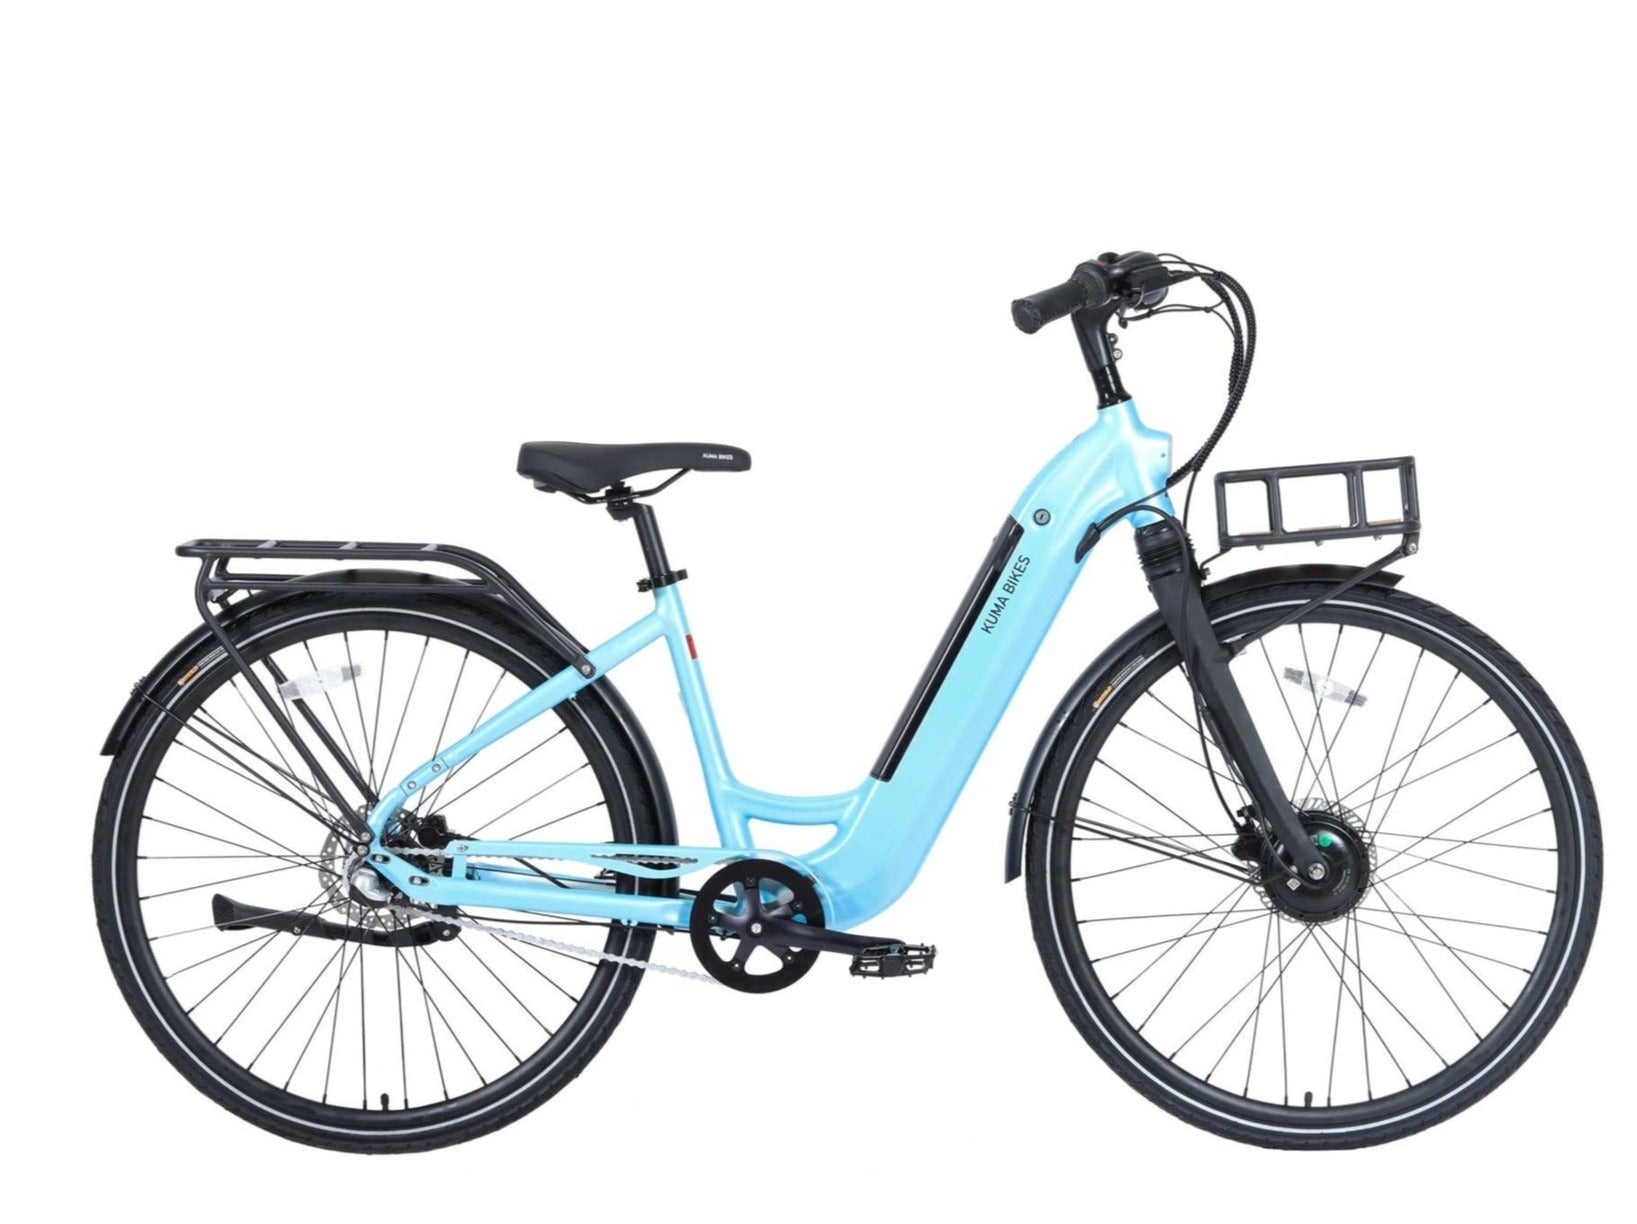 A product image of the Kuma S2 electric bike showing the right side of the bike against a white background. The frame colour is Glacier Blue.